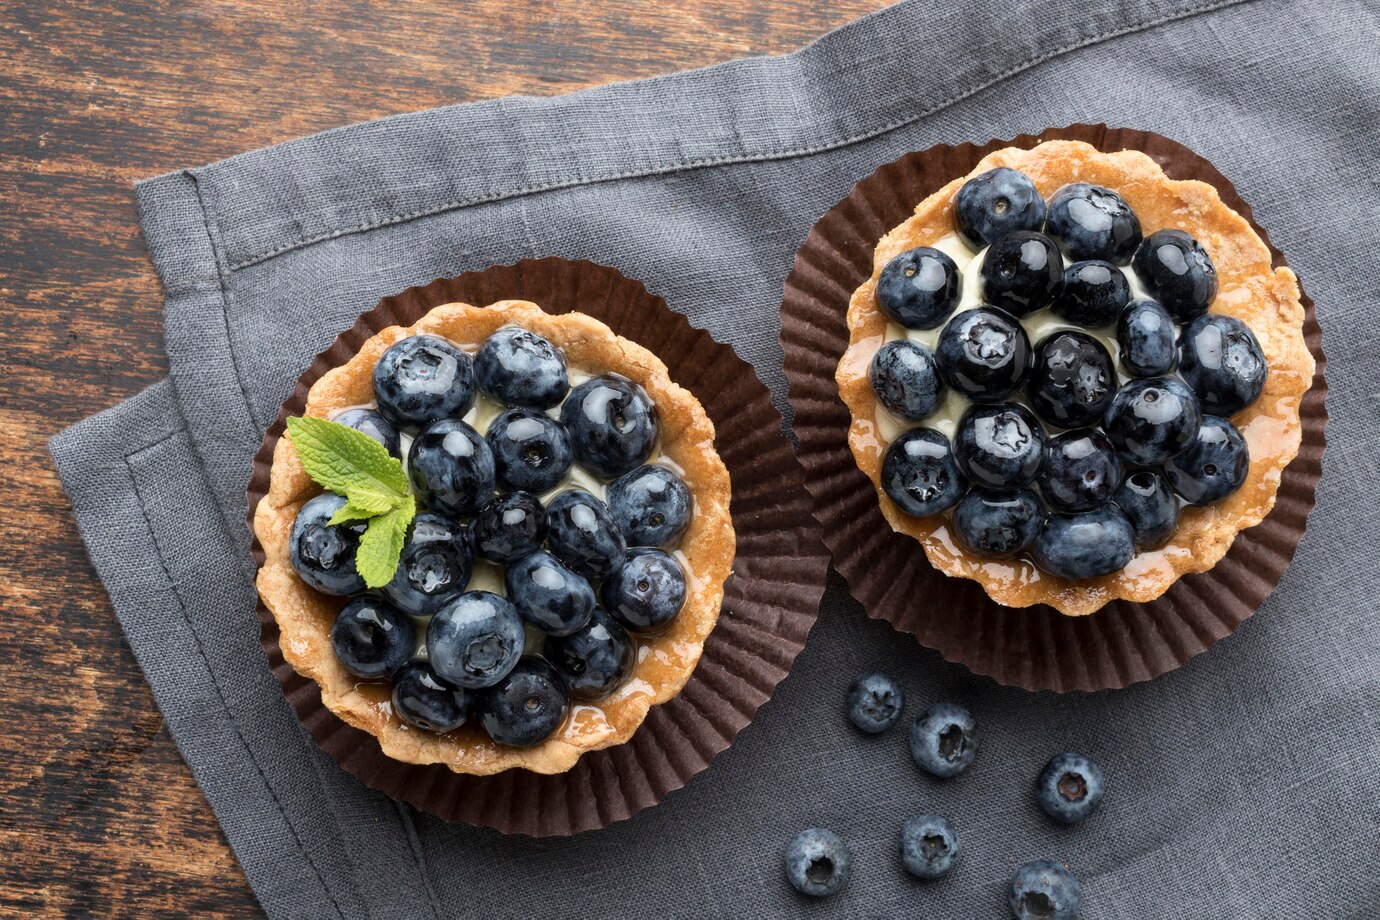 top-view-blueberry-desserts-with-mint_23-2148689836.jpg